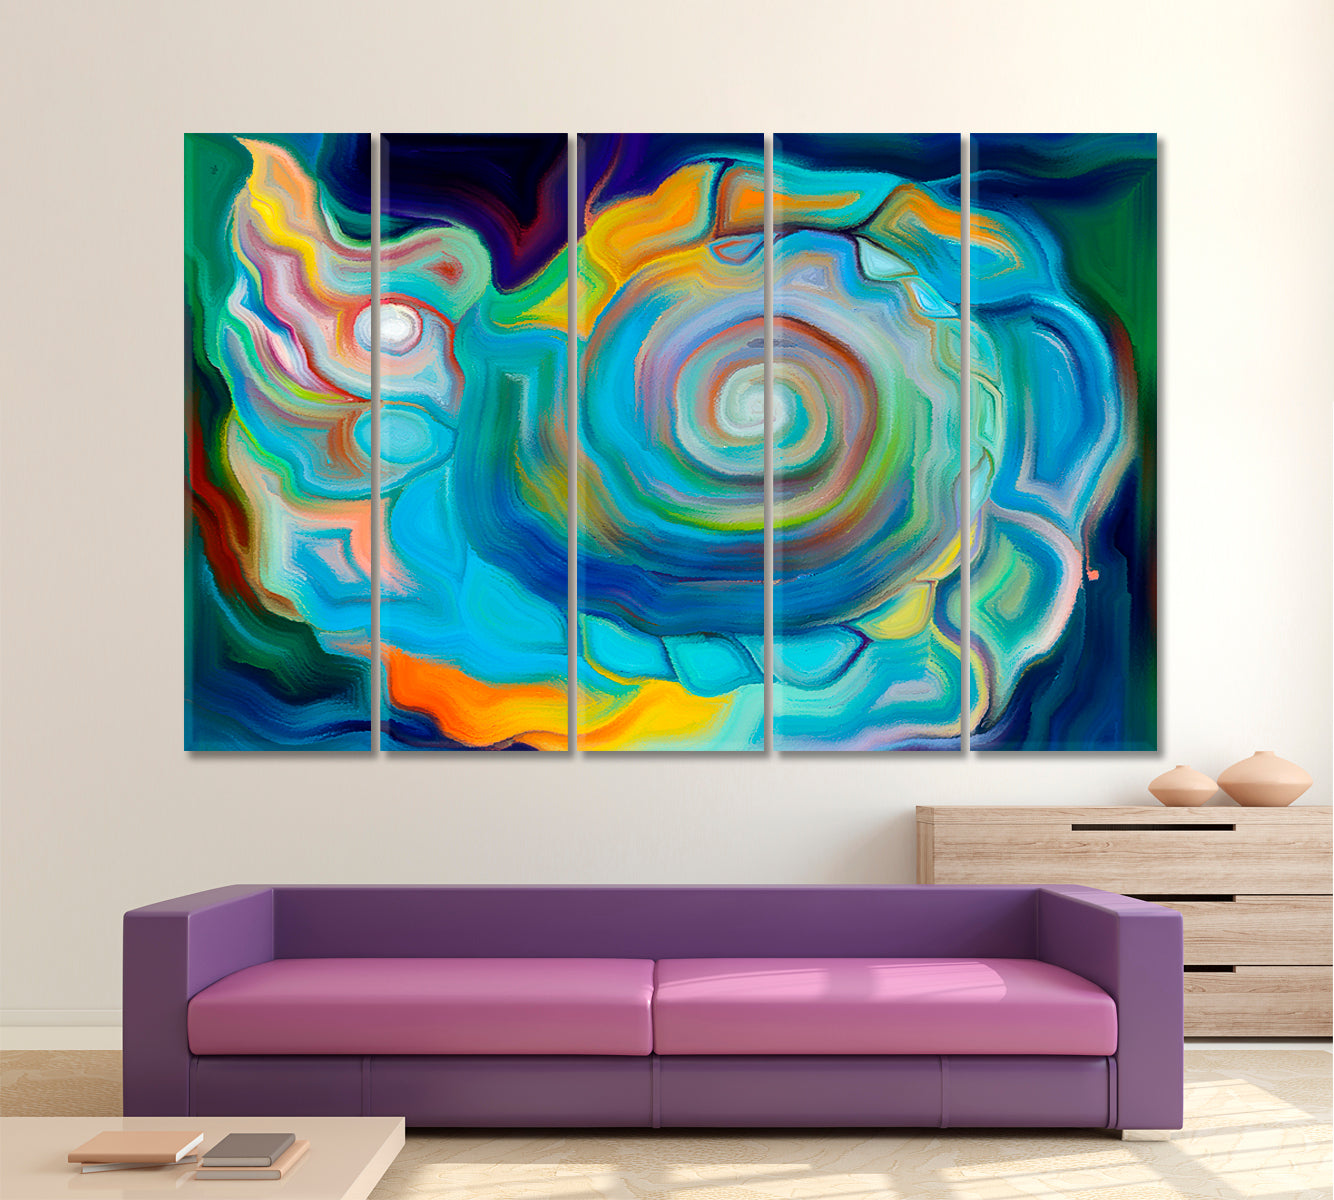 SEA LIFE IN FORMS  Abstract Seashell Vivid Contemporary Abstraction Canvas Print Abstract Art Print Artesty 5 panels 36" x 24" 